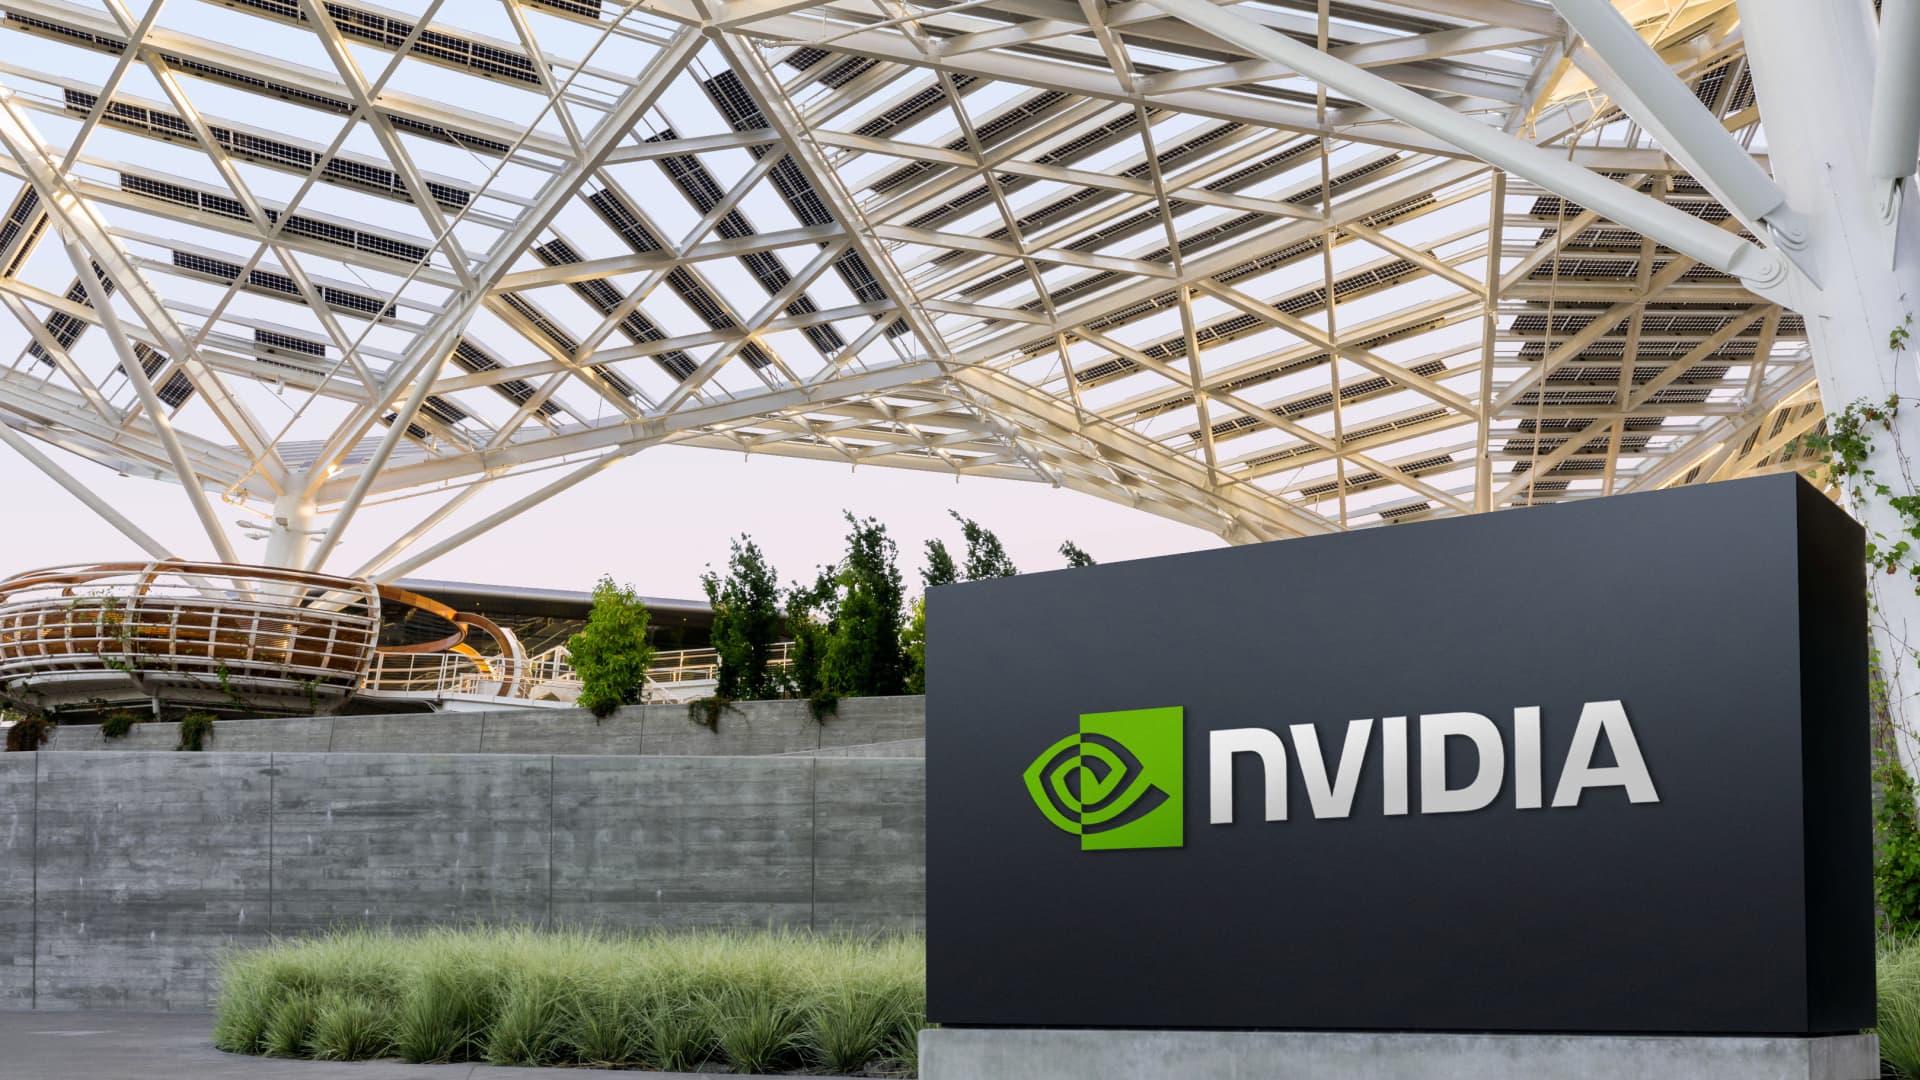 Top Wall Street analysts pick these 5 stocks for compelling returns, including Nvidia